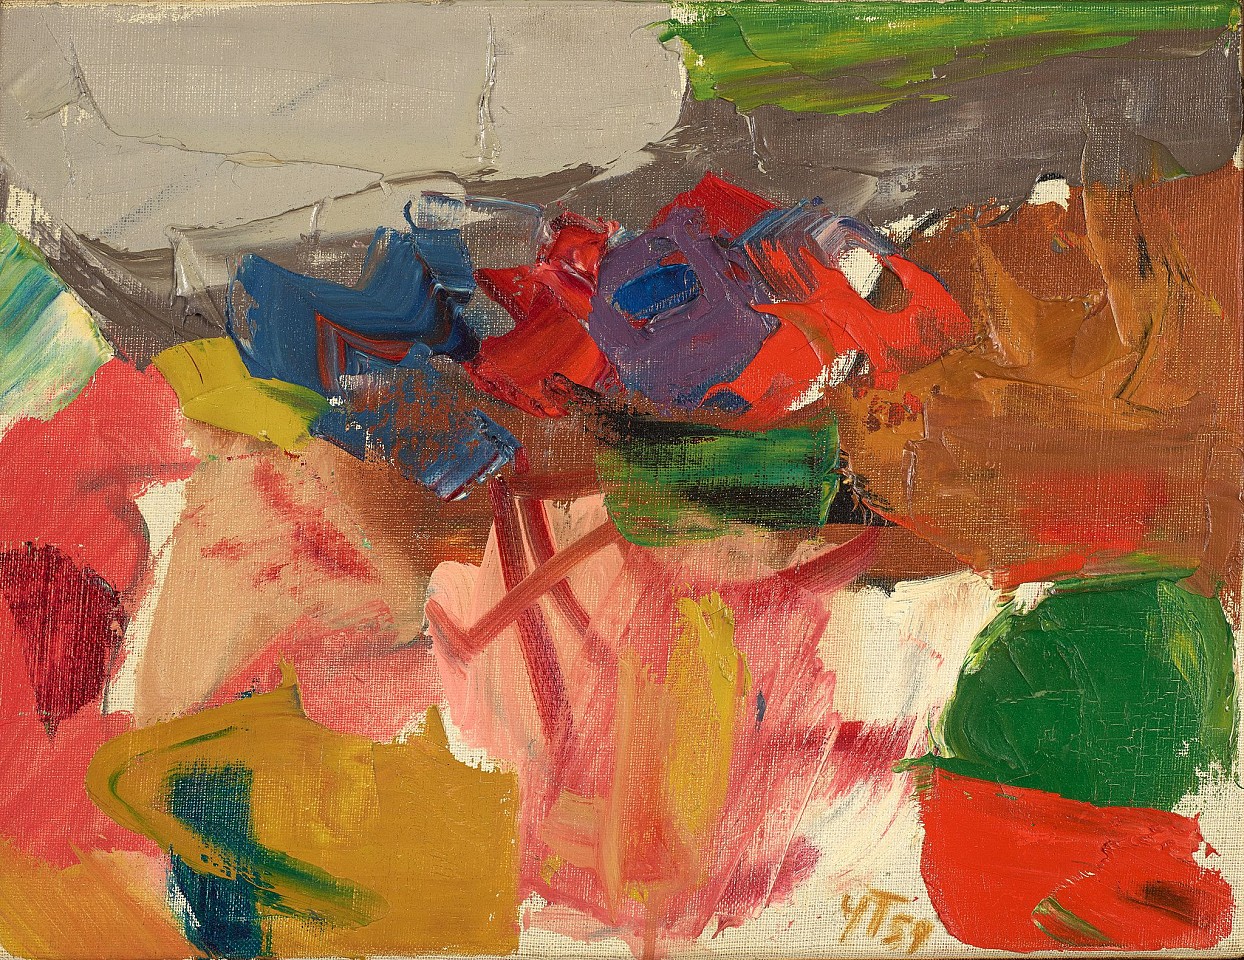 Yvonne Thomas, Wind | SOLD, 1959
Oil on canvas, 11 1/4 x 14 1/4 in. (28.6 x 36.2 cm)
SOLD
THO-00033